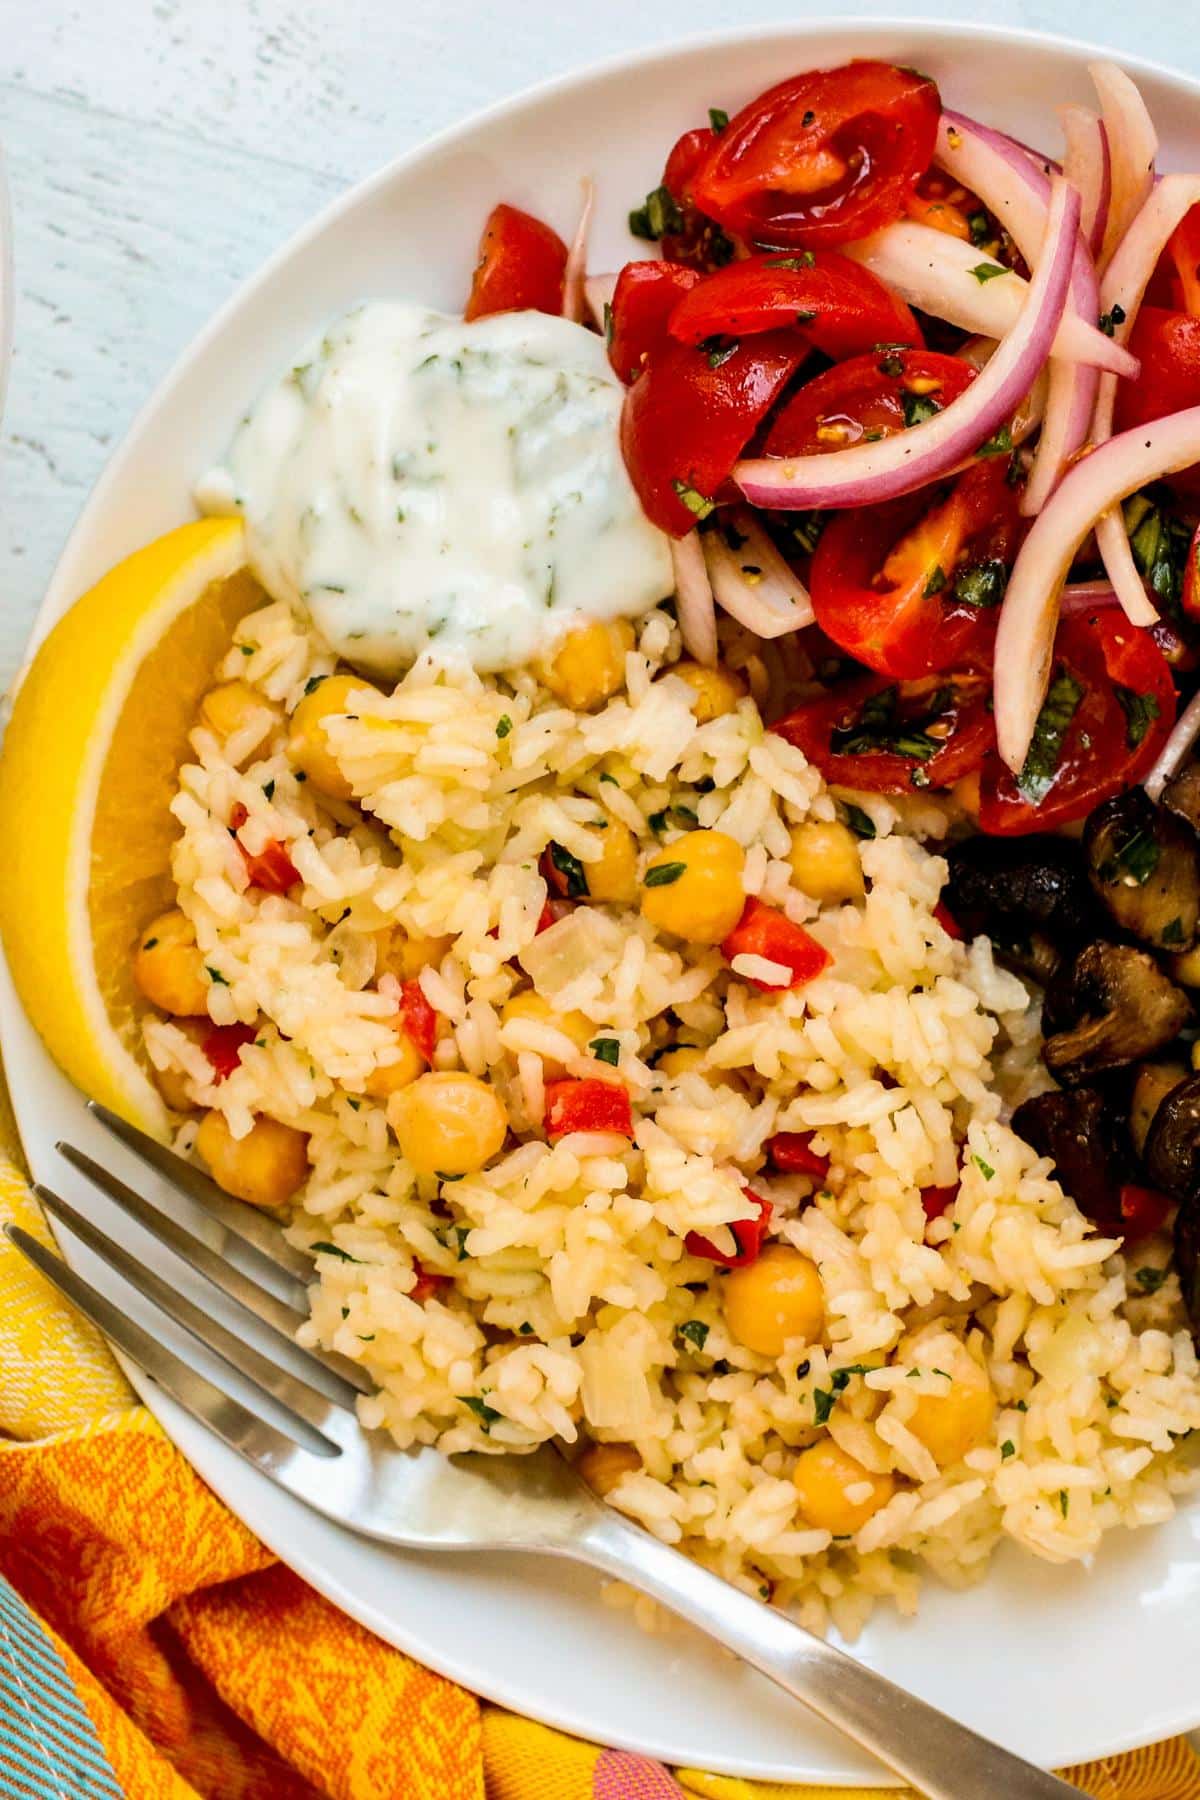 Dollop of yogurt sauce on a plate with chickpea rice pilaf, tomato and onion salad, and roasted mushrooms.